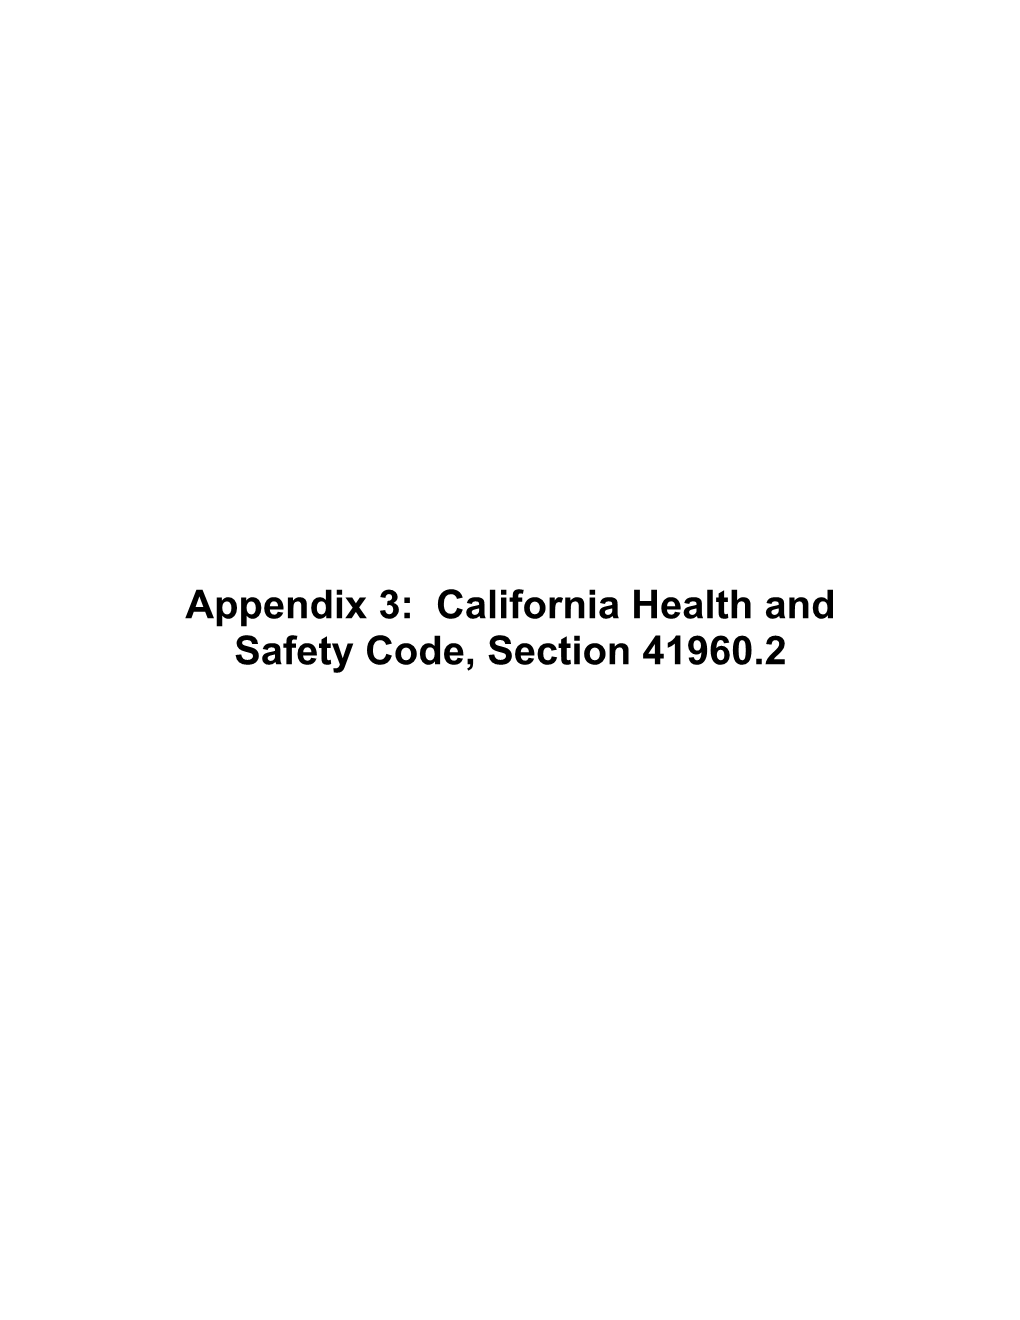 Appendix 3: California Health and Safety Code, Section 41960.2 California Health and Safety